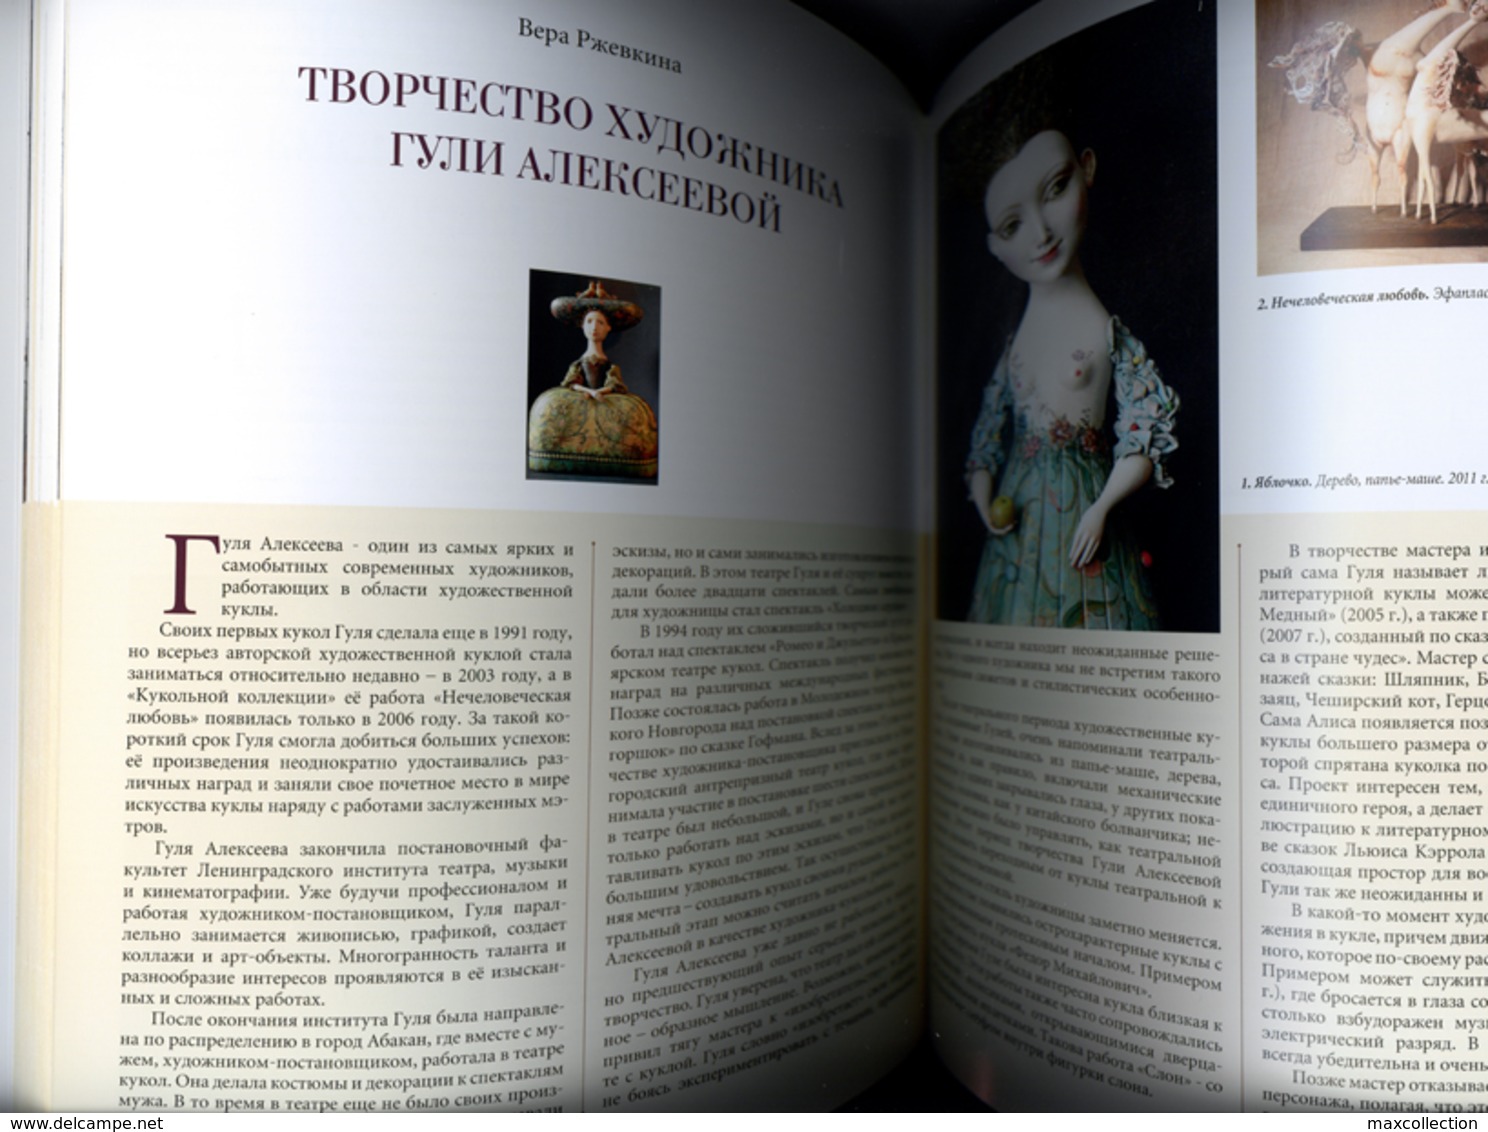 "ART DOLL. ORIGINS AND MODERNITY." ALMANAC. Russian collections.